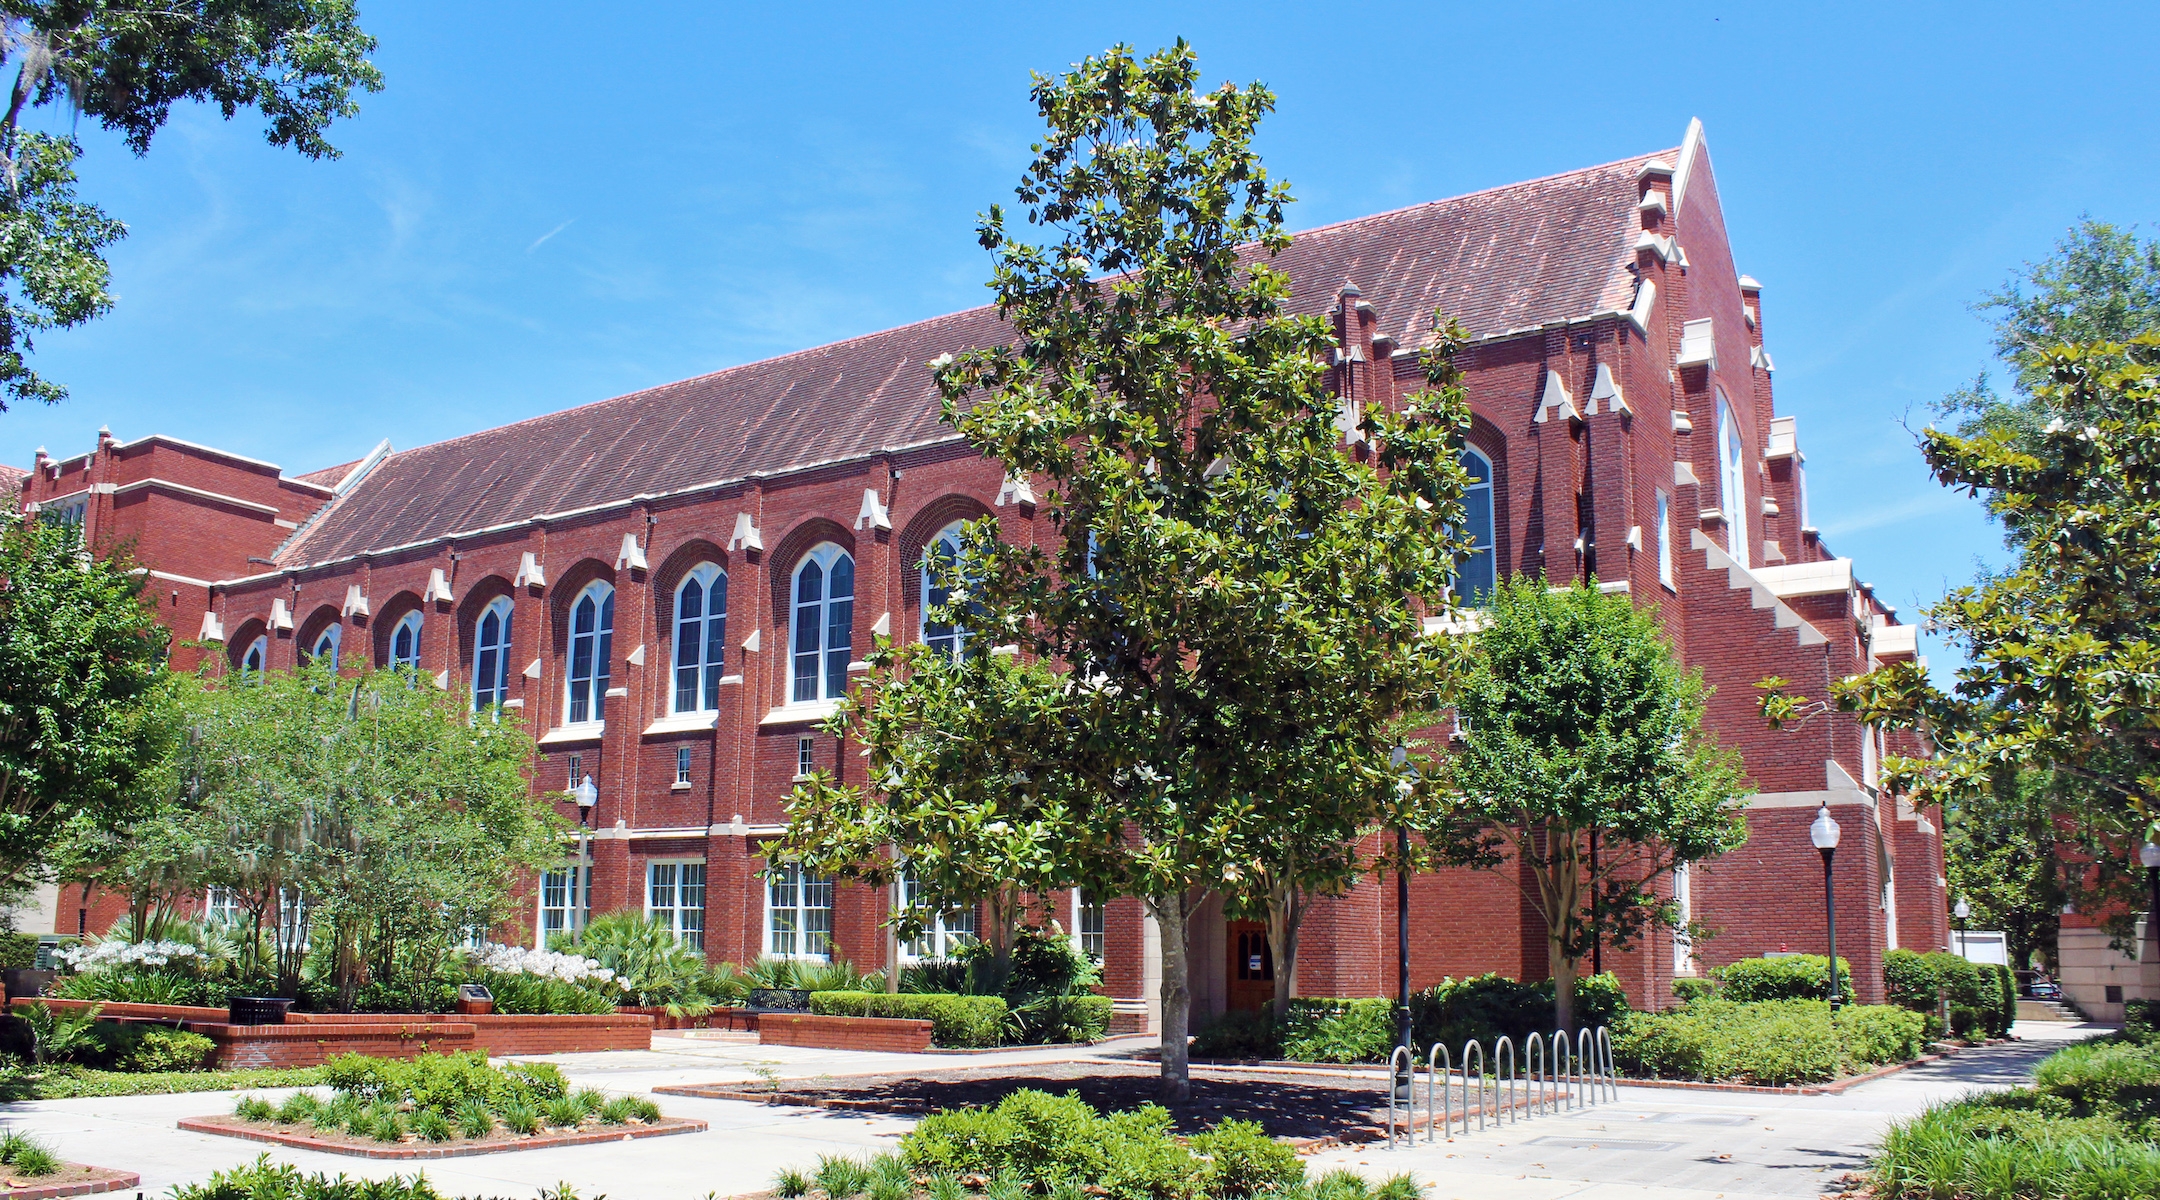 The University of Florida's largest campus is in Gainesville.